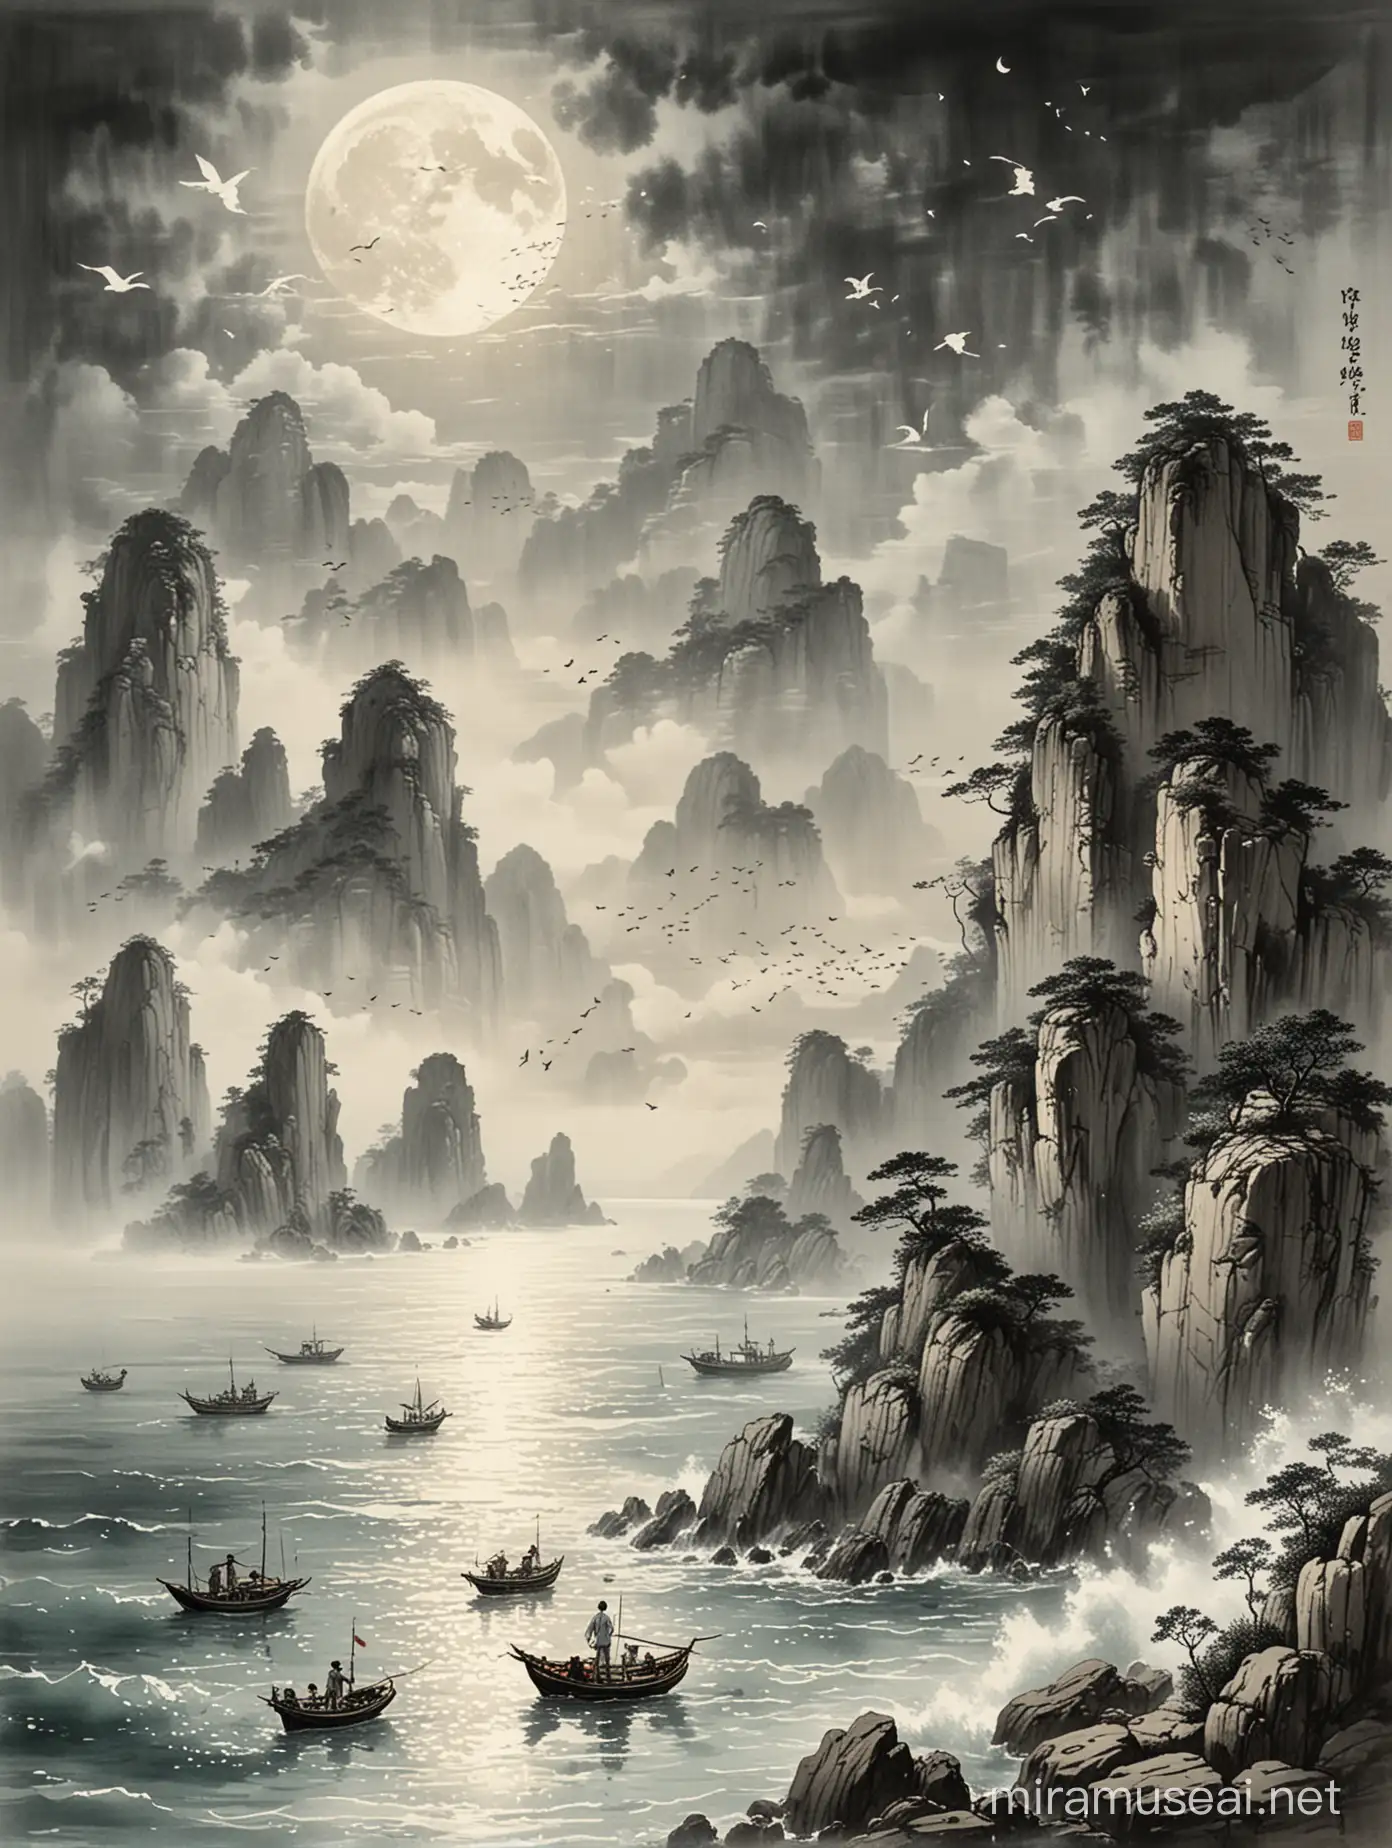 The image Chinese brush drawing features a man in white standing on a rock looking out at the sea. There are five boats on the sea and birds flying in the sky. The moon is large and bright.